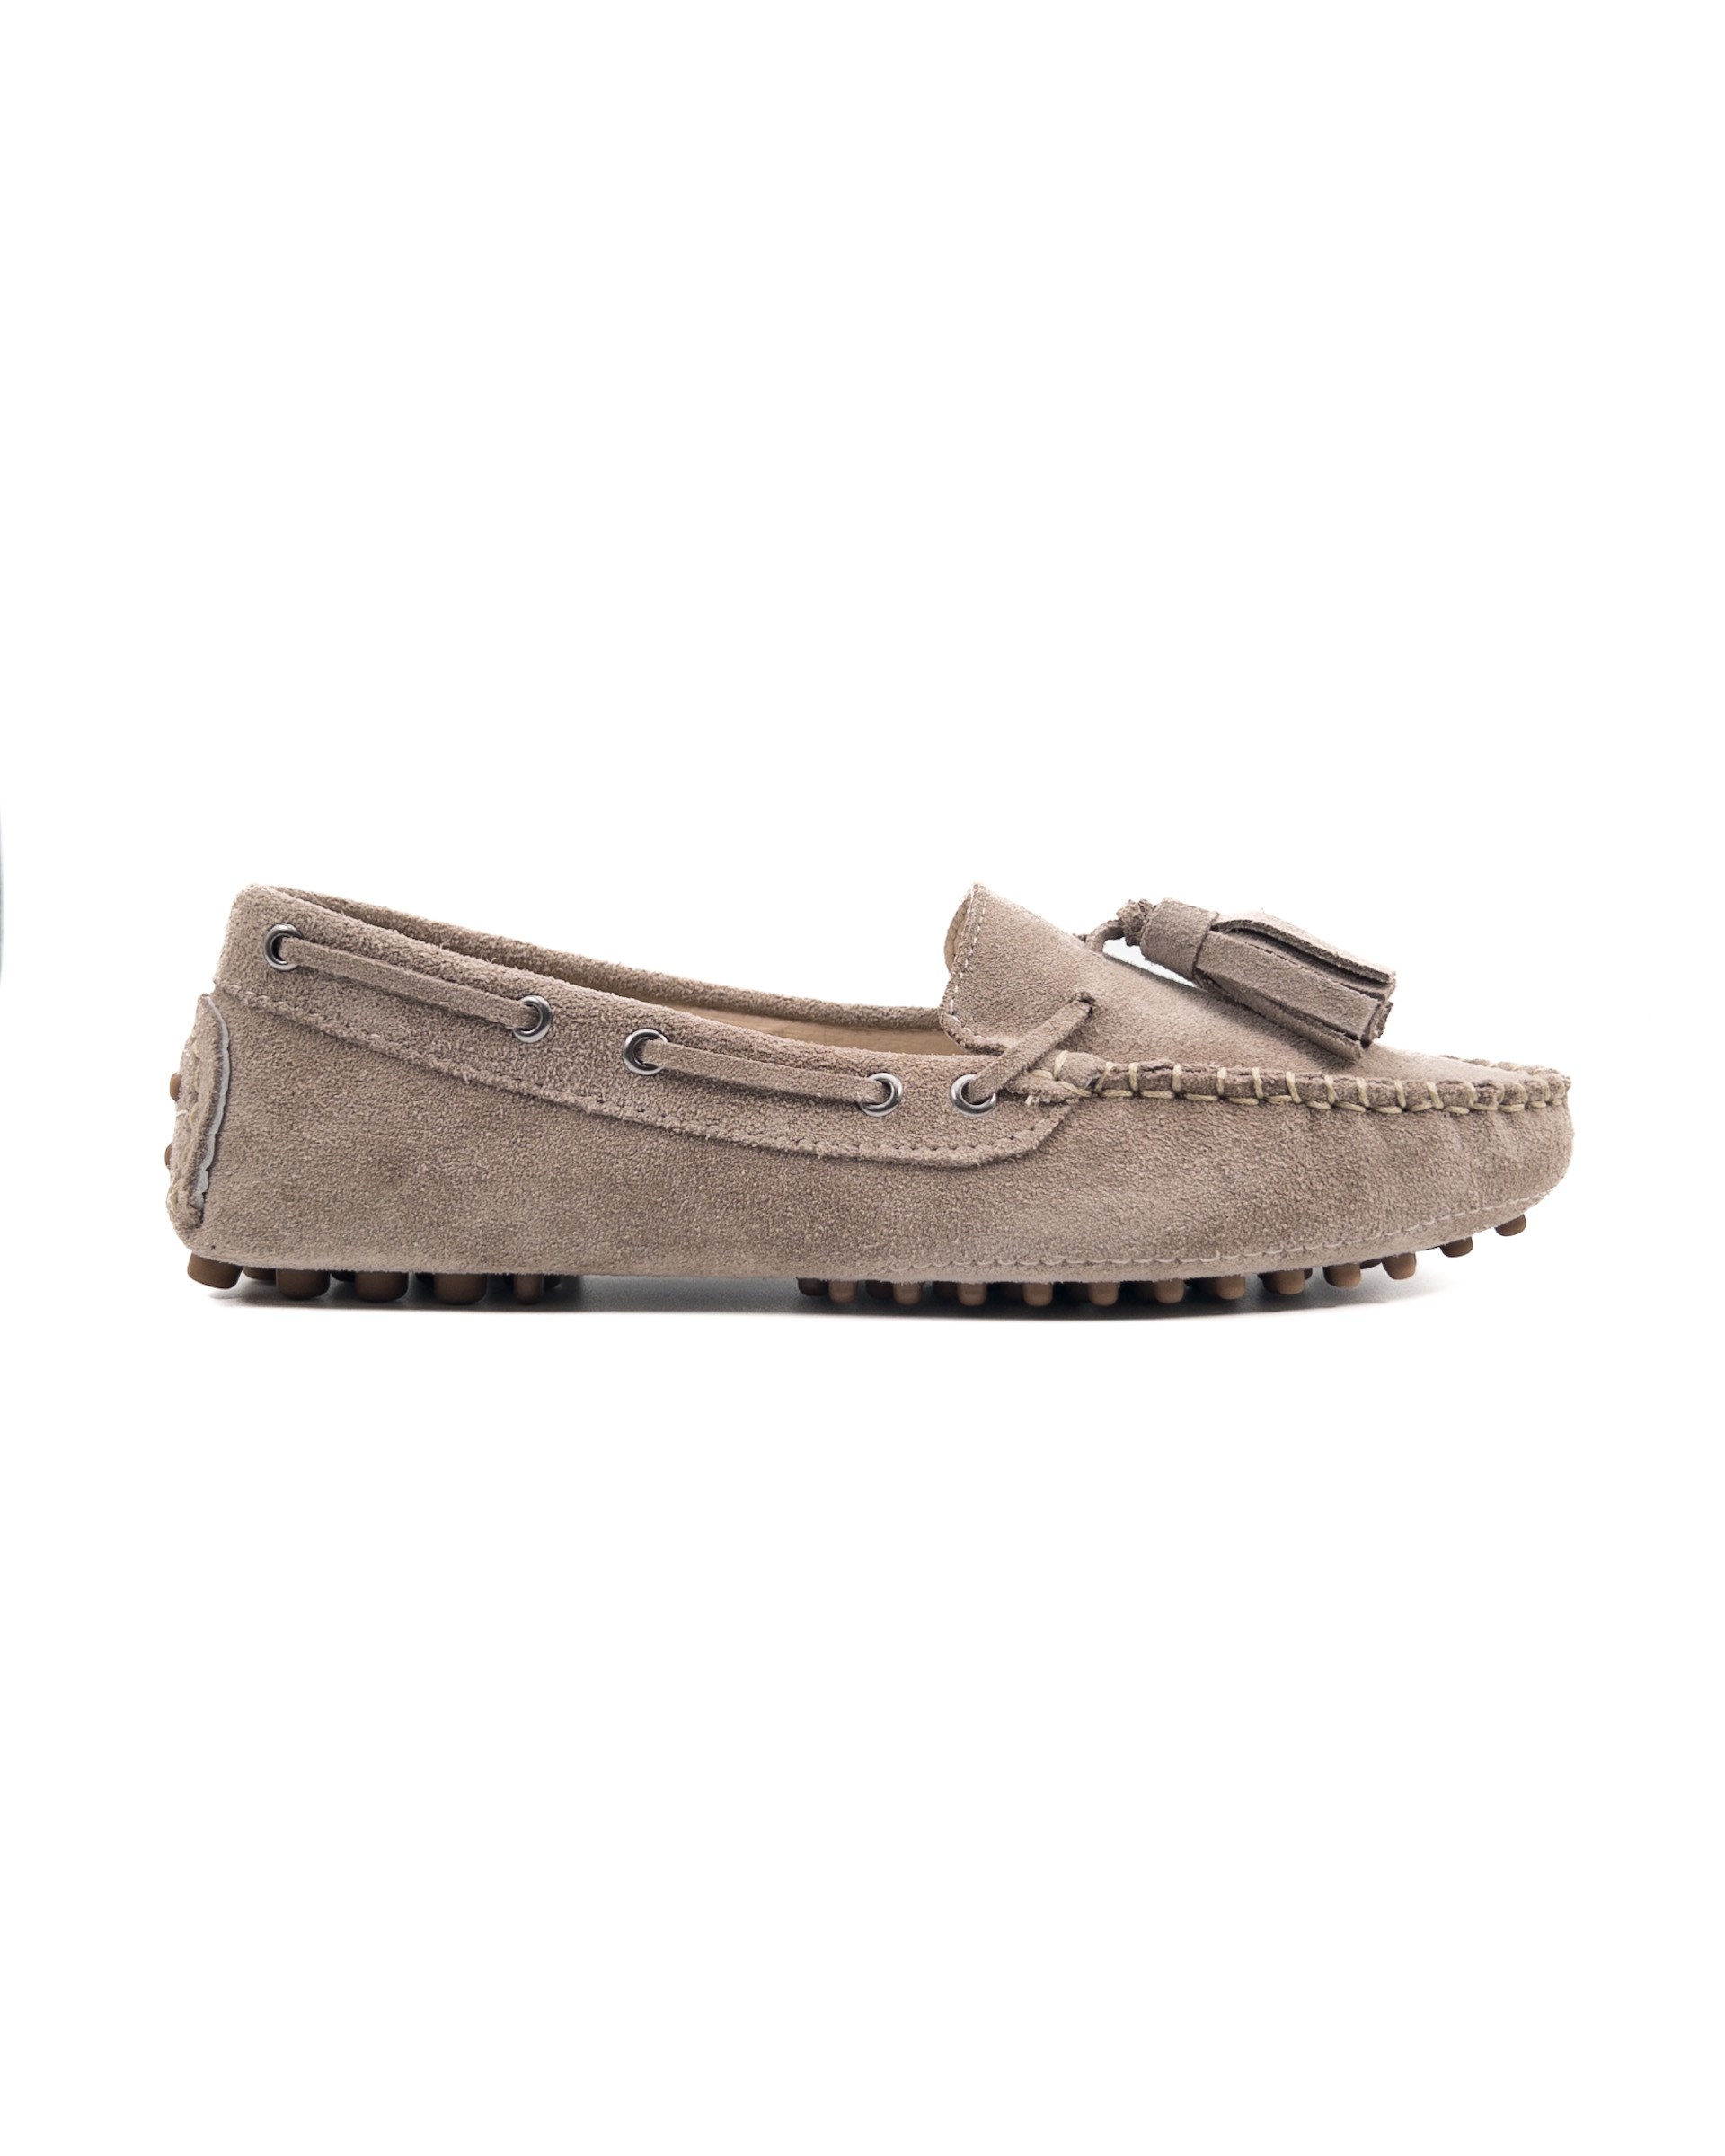 Mira Minsk Genuine Suede Leather Loafer Shoes for Women | Tezcan